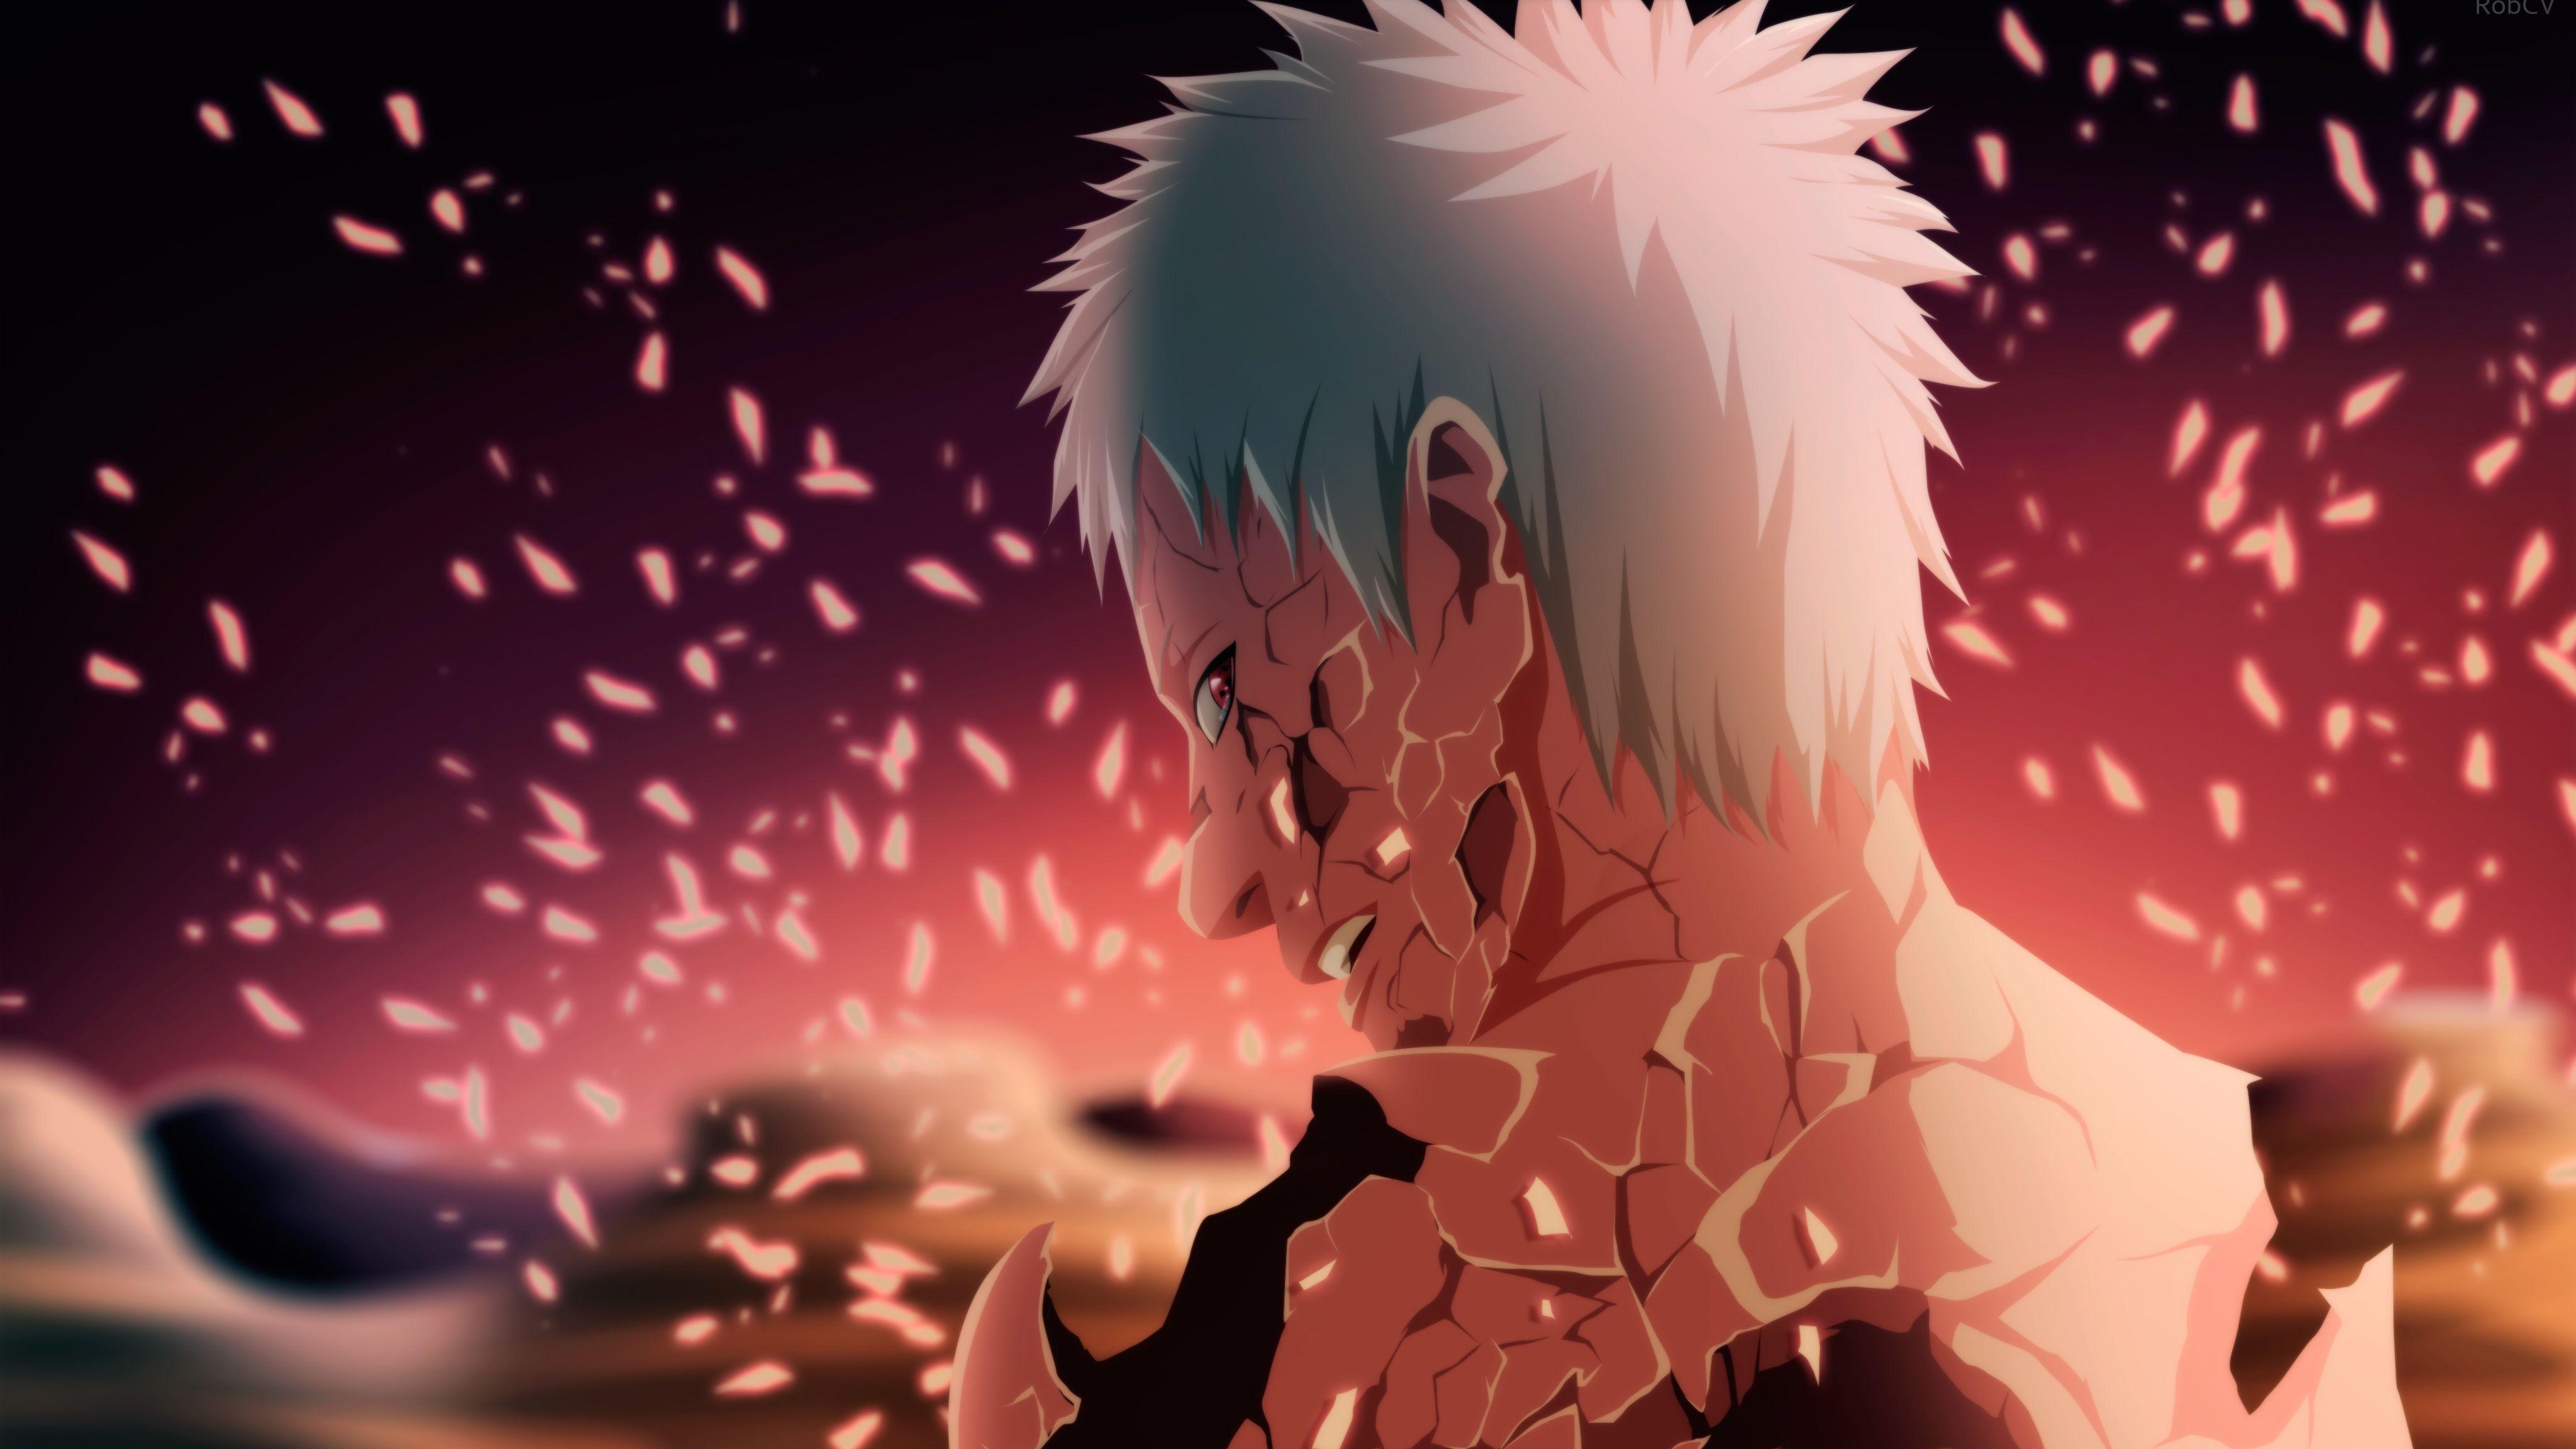 Death of Obito uchiha 4k Ultra HD Wallpapers and Backgrounds Image